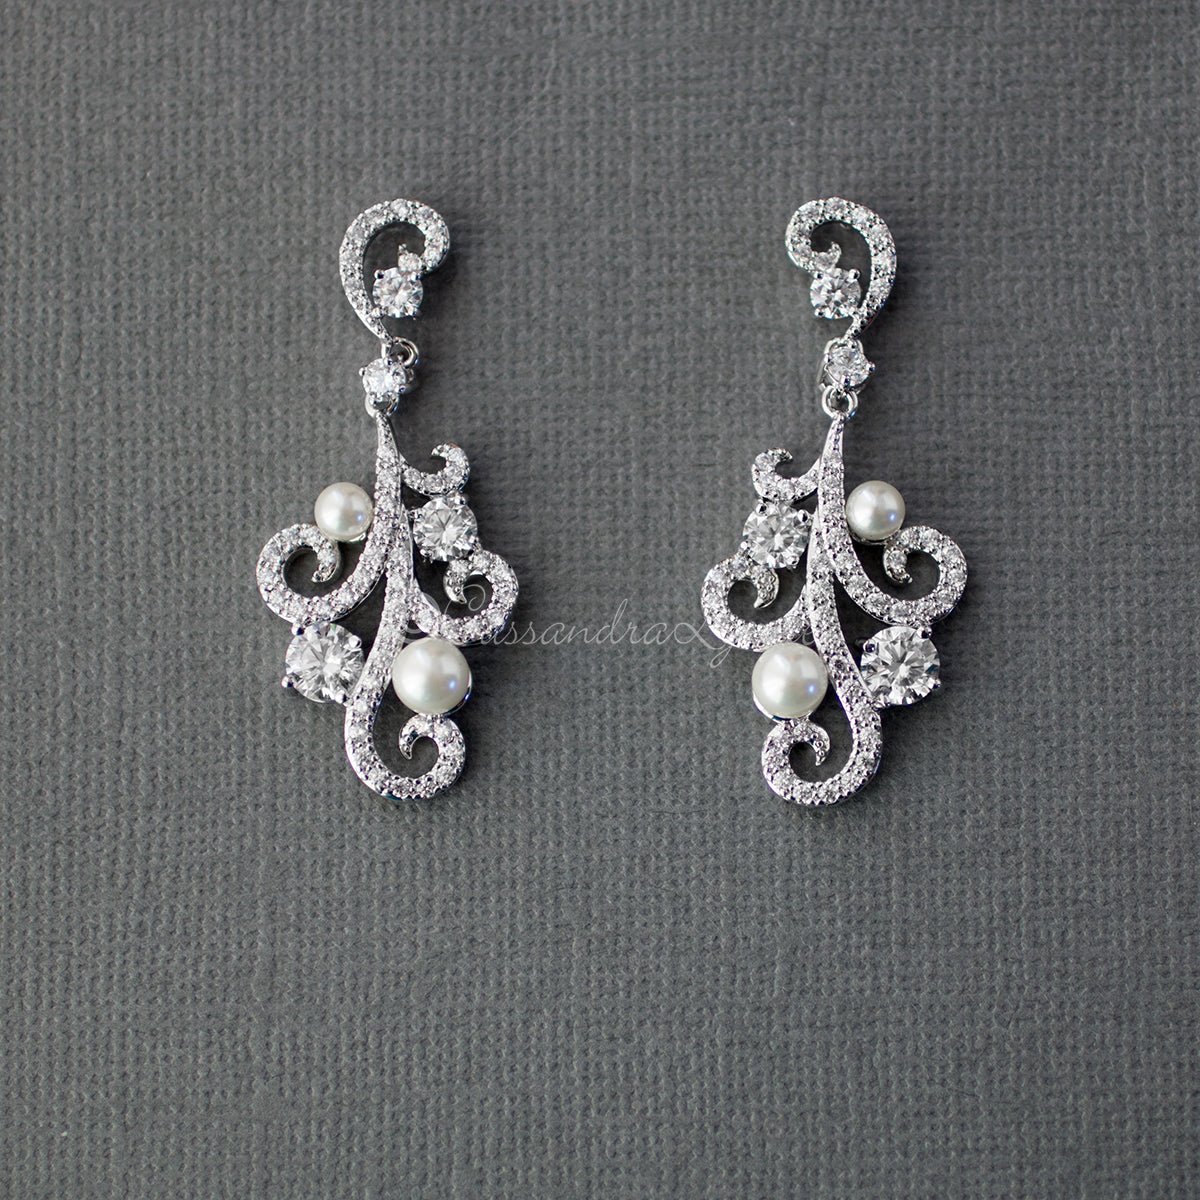 Clip On Pearl CZ Earrings with a Swirl Design